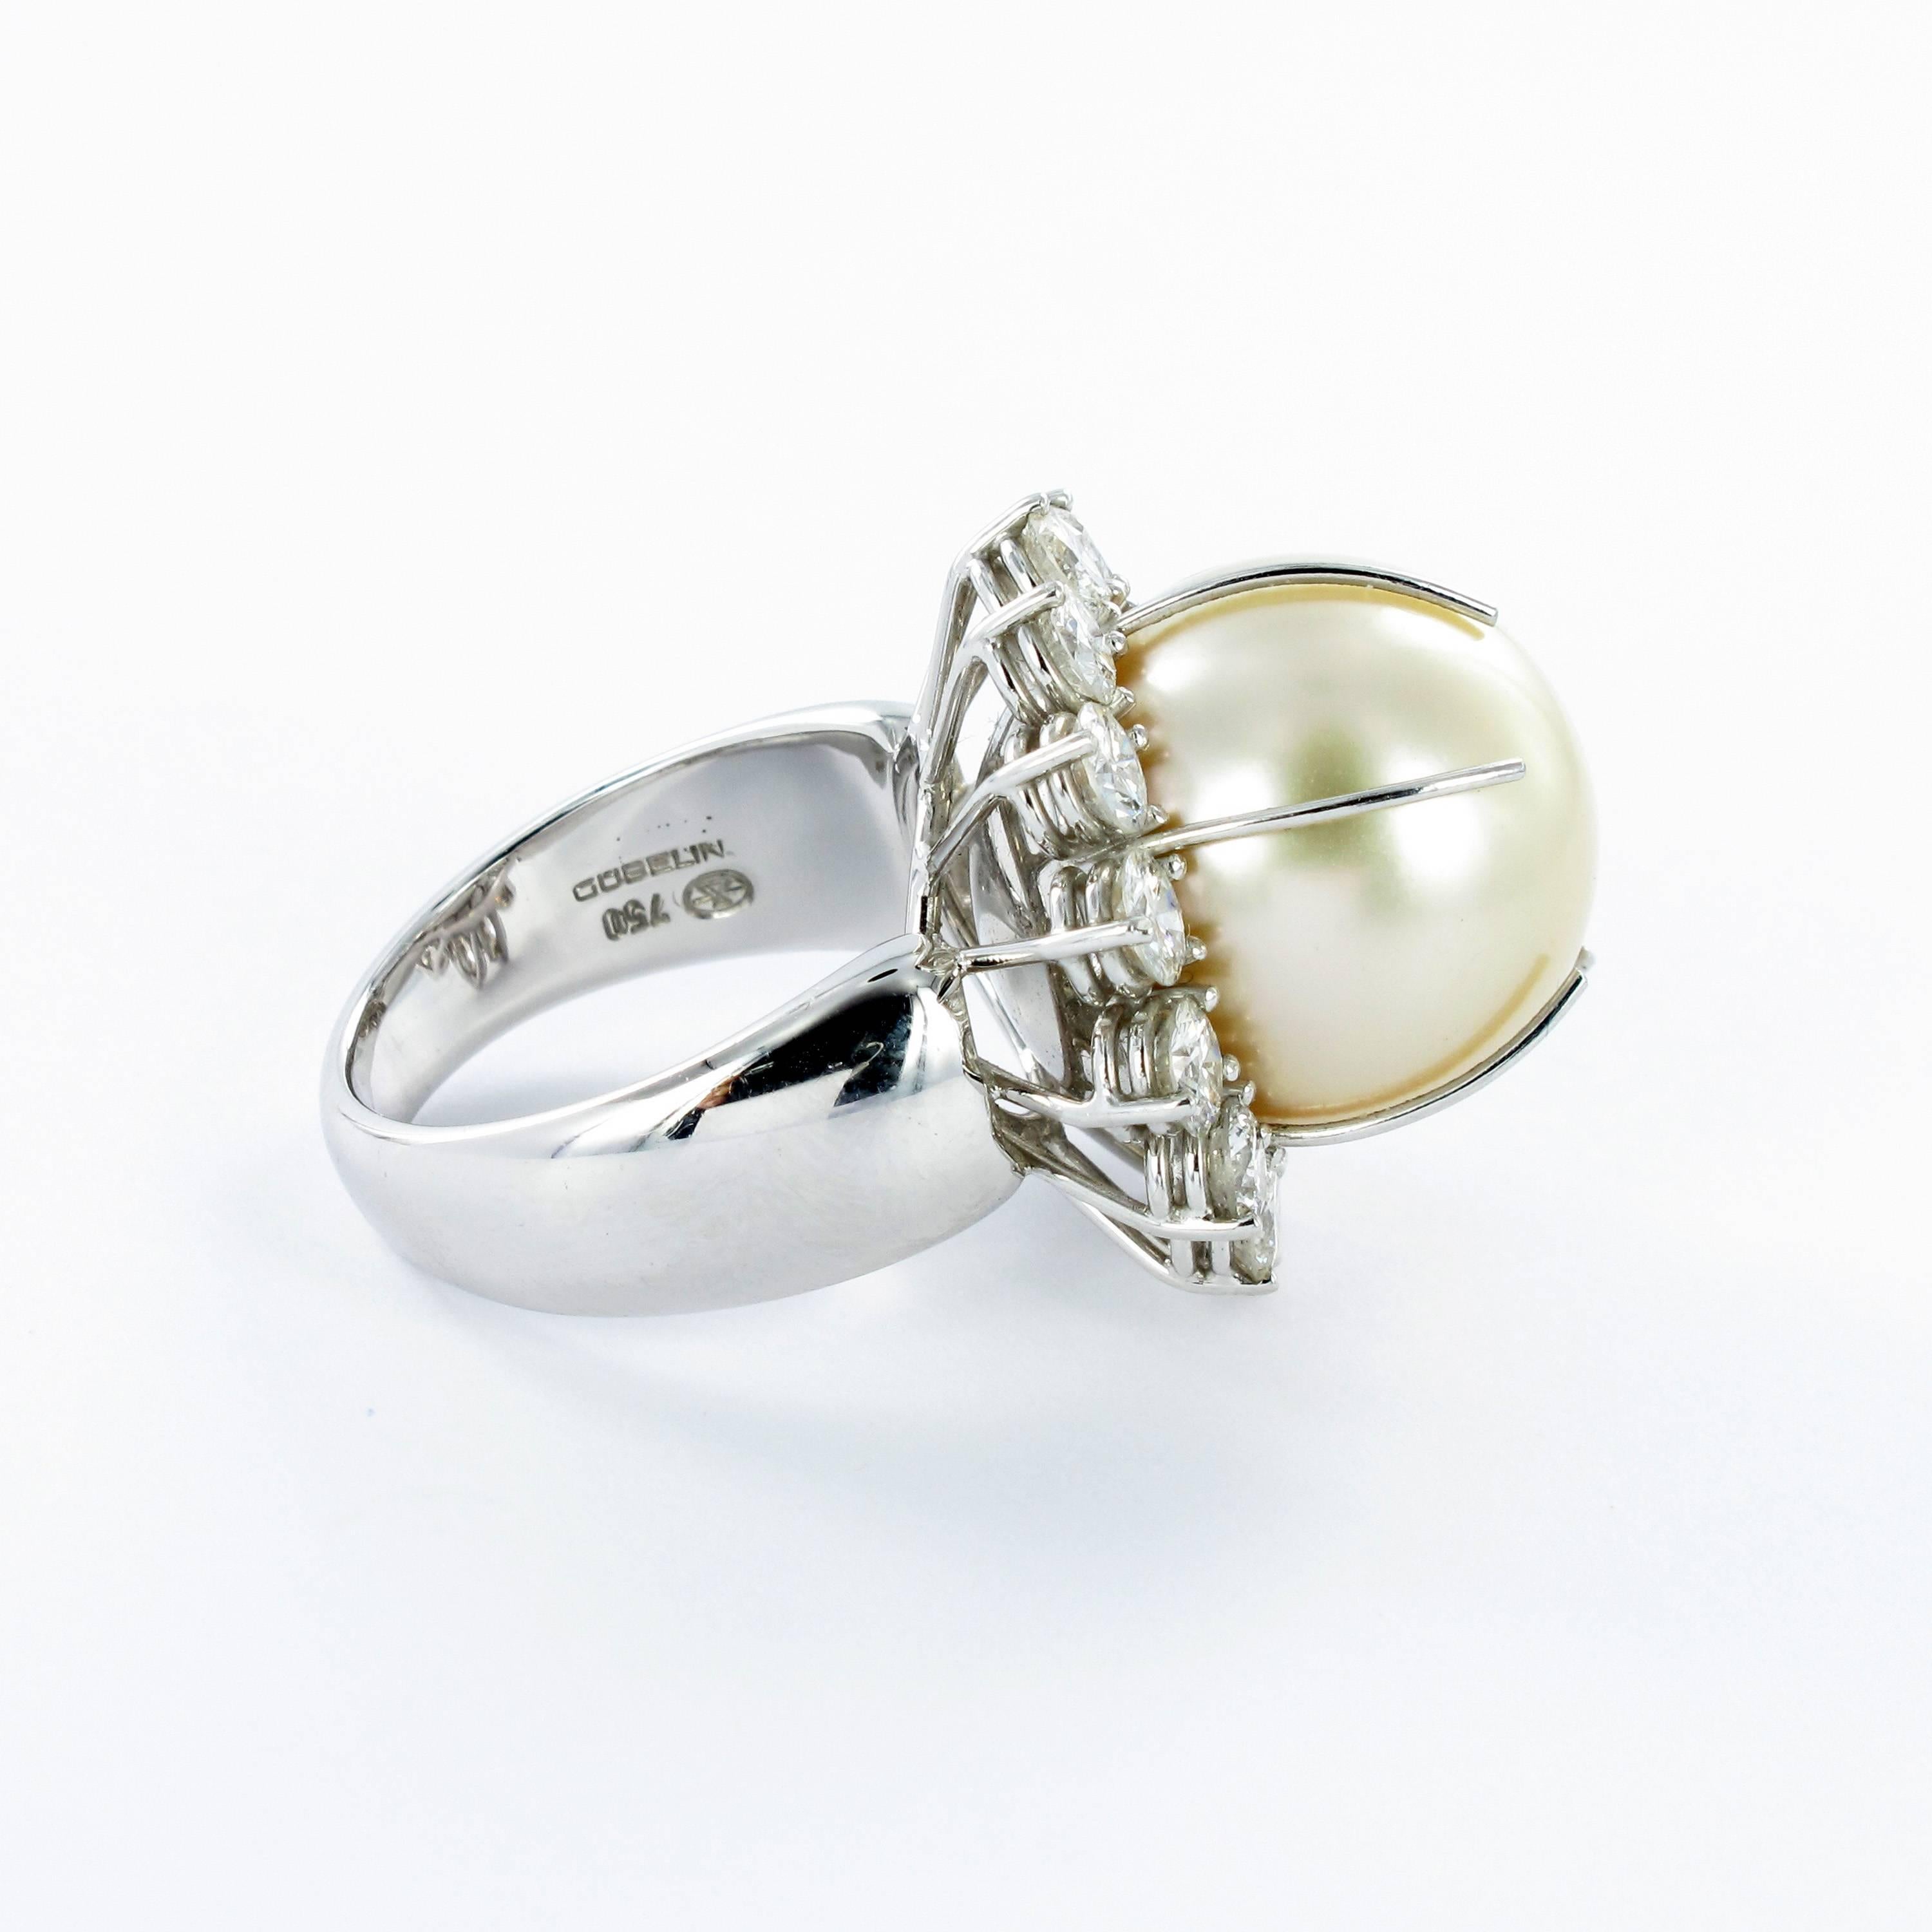 Gübelin South Sea Cultured Pearl and Diamond Cocktail Ring 4